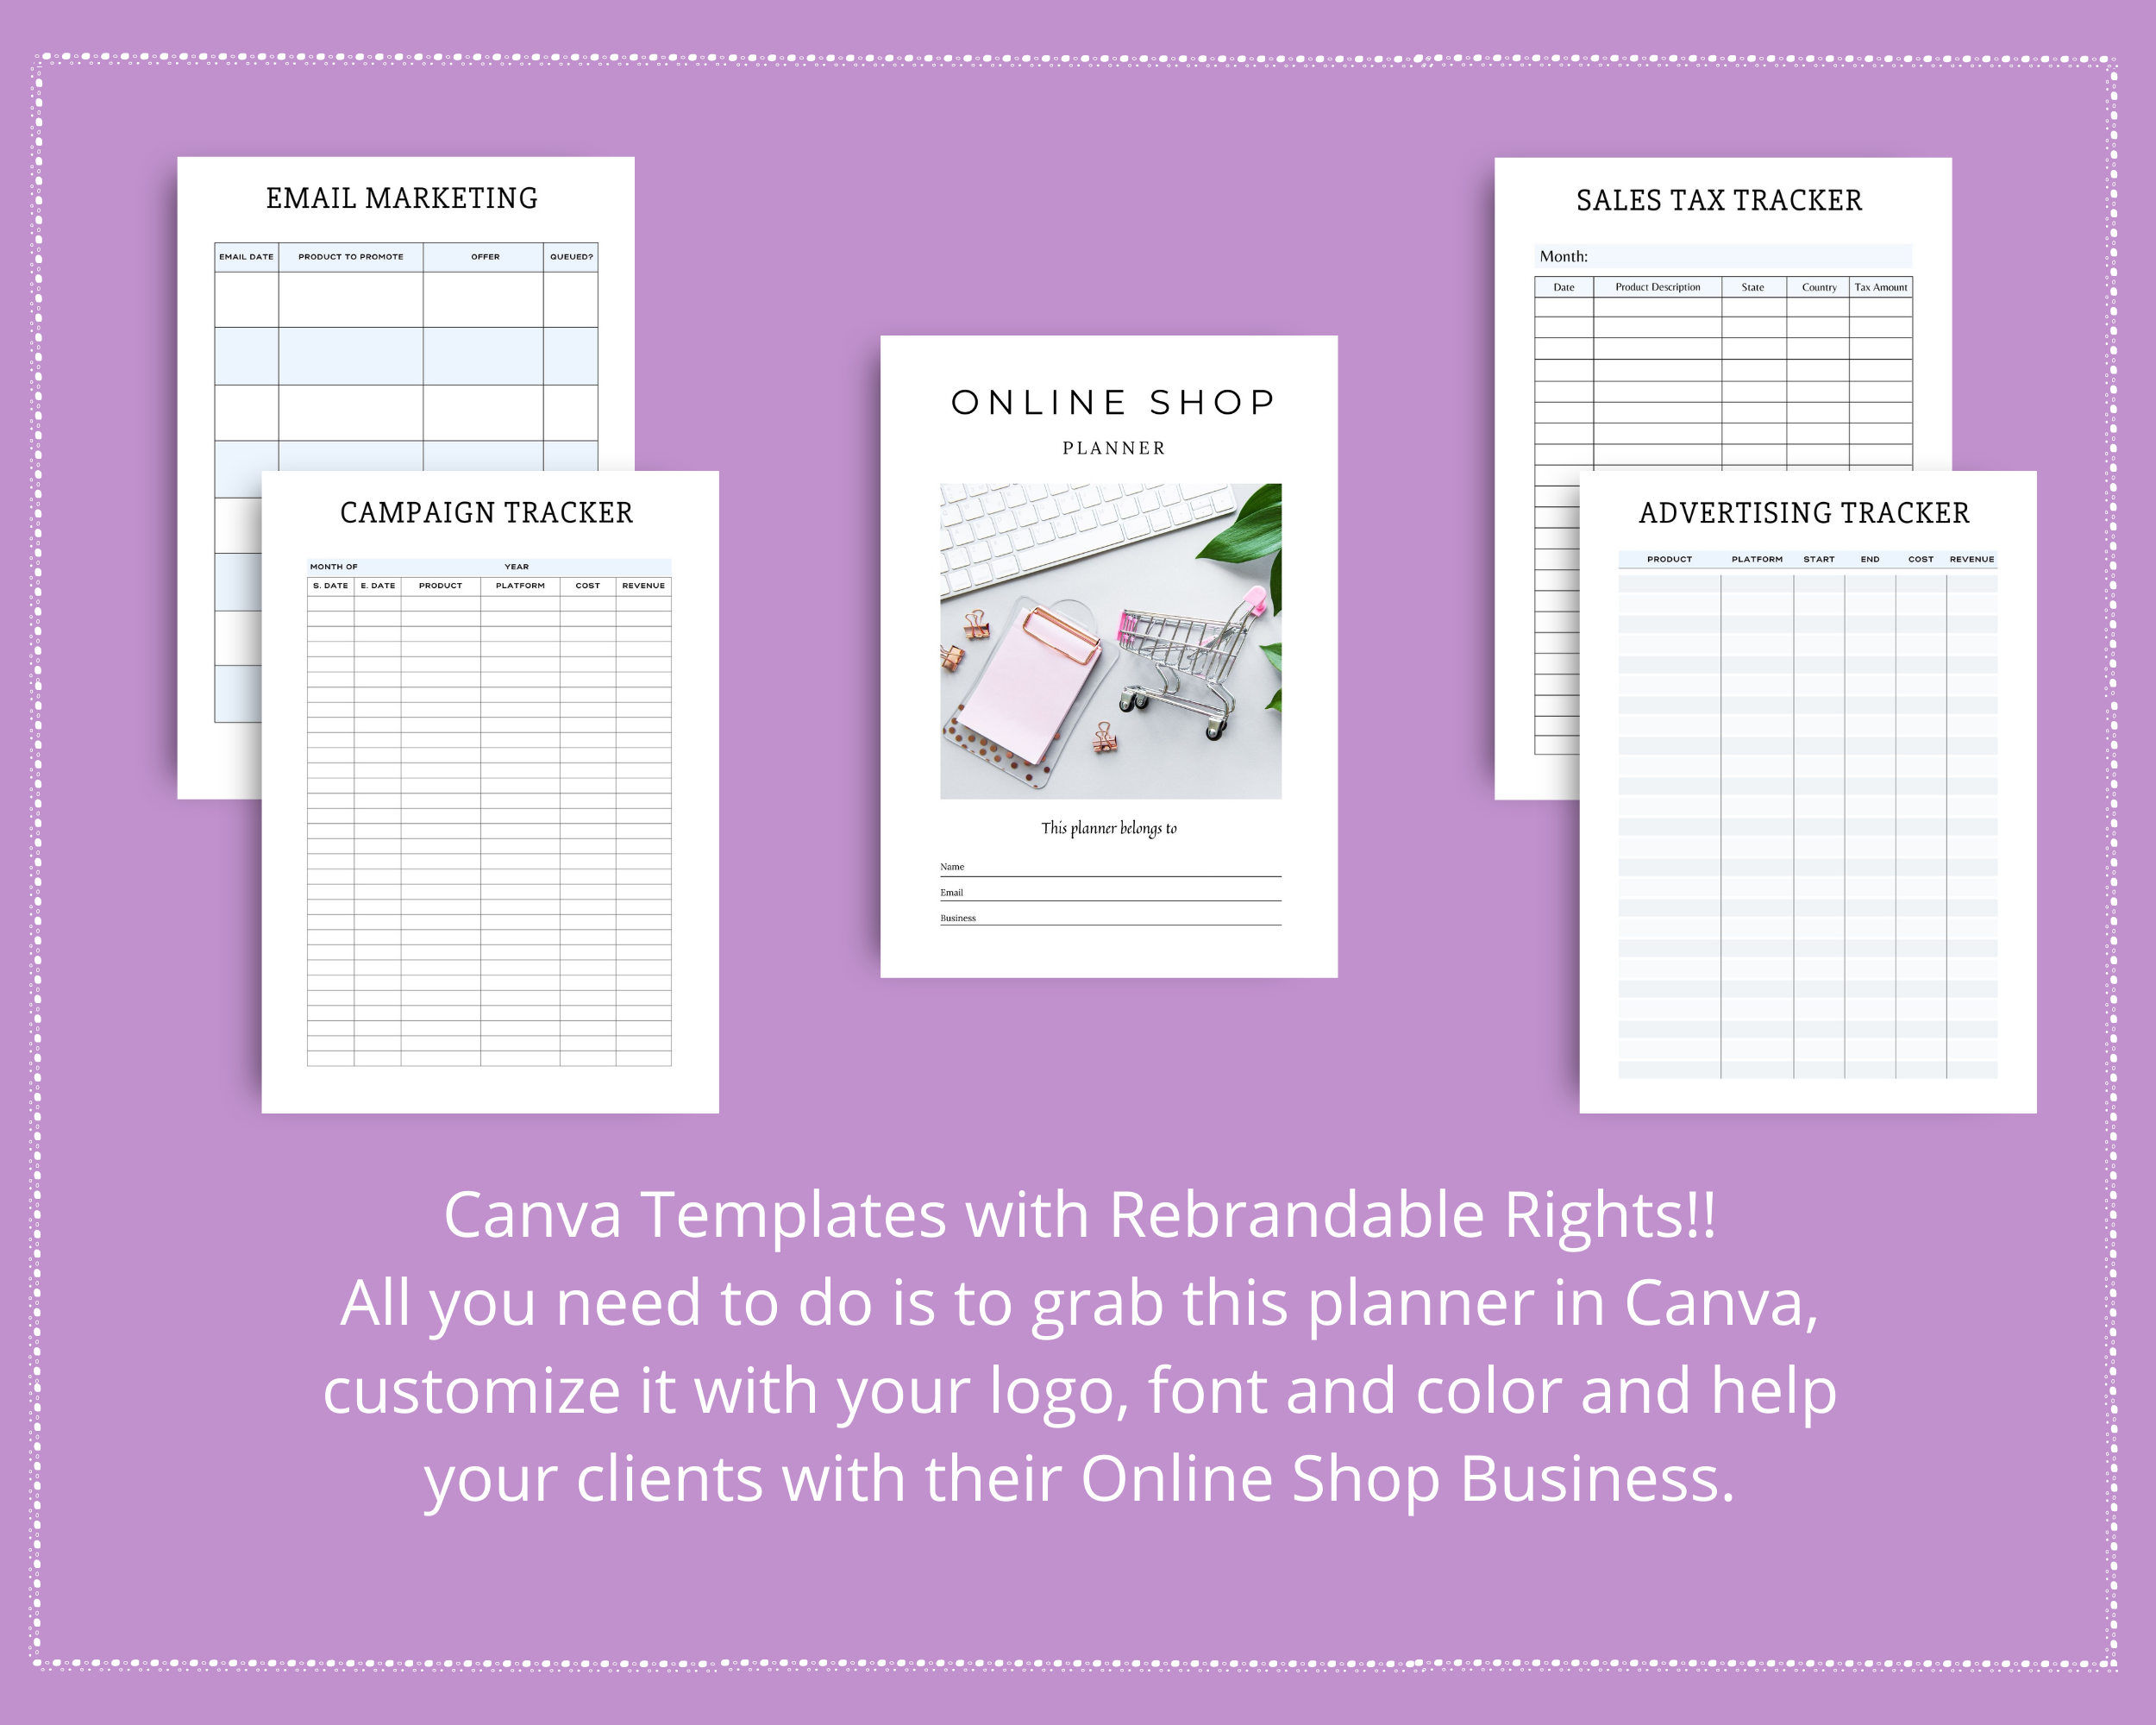 Editable Online Shop Planner Templates in Canva | Commercial Use